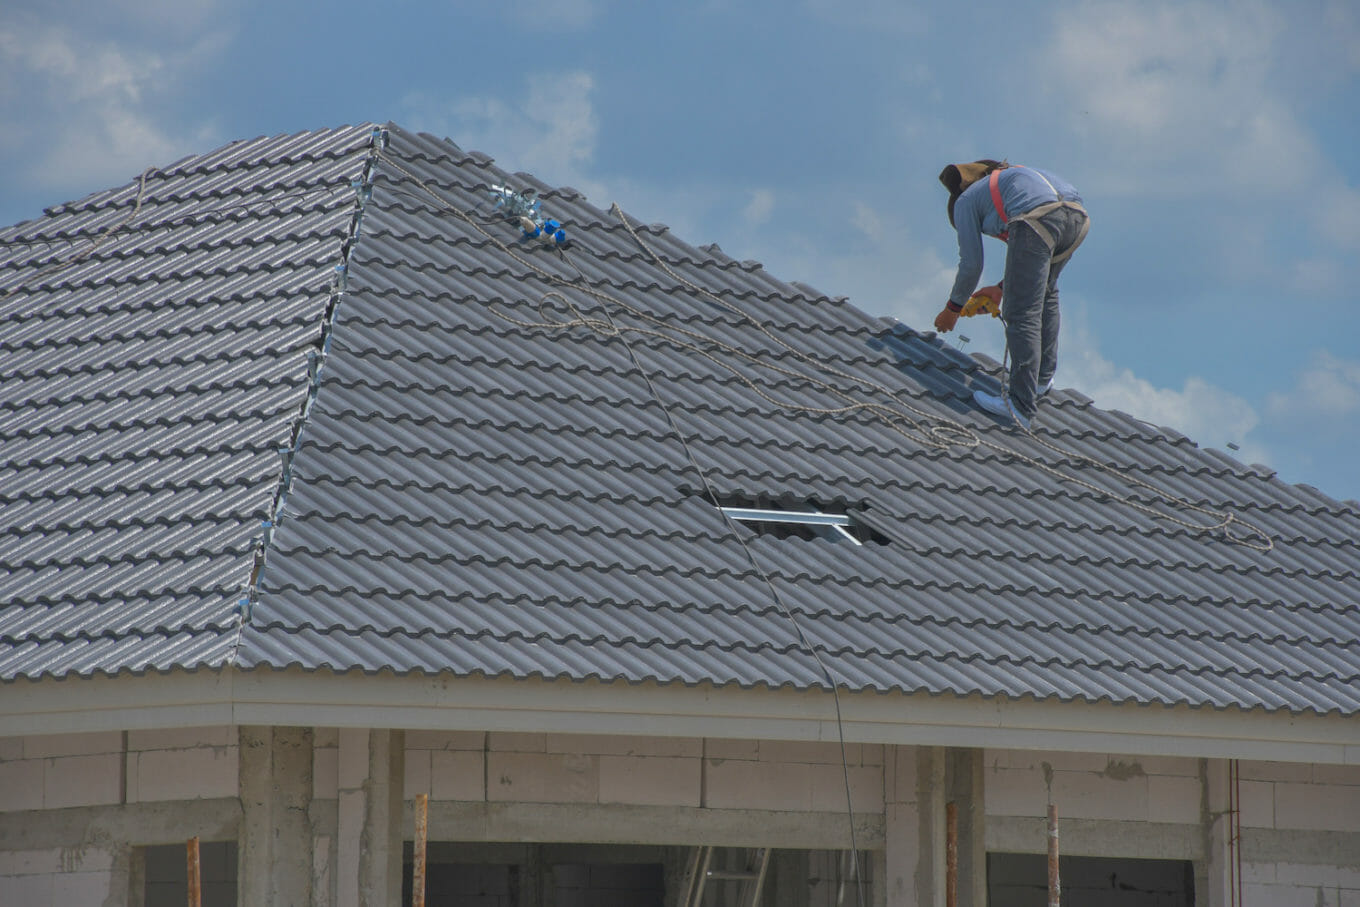 a professional roofer gets up on the roof and checks to estimate the roof replacement cost